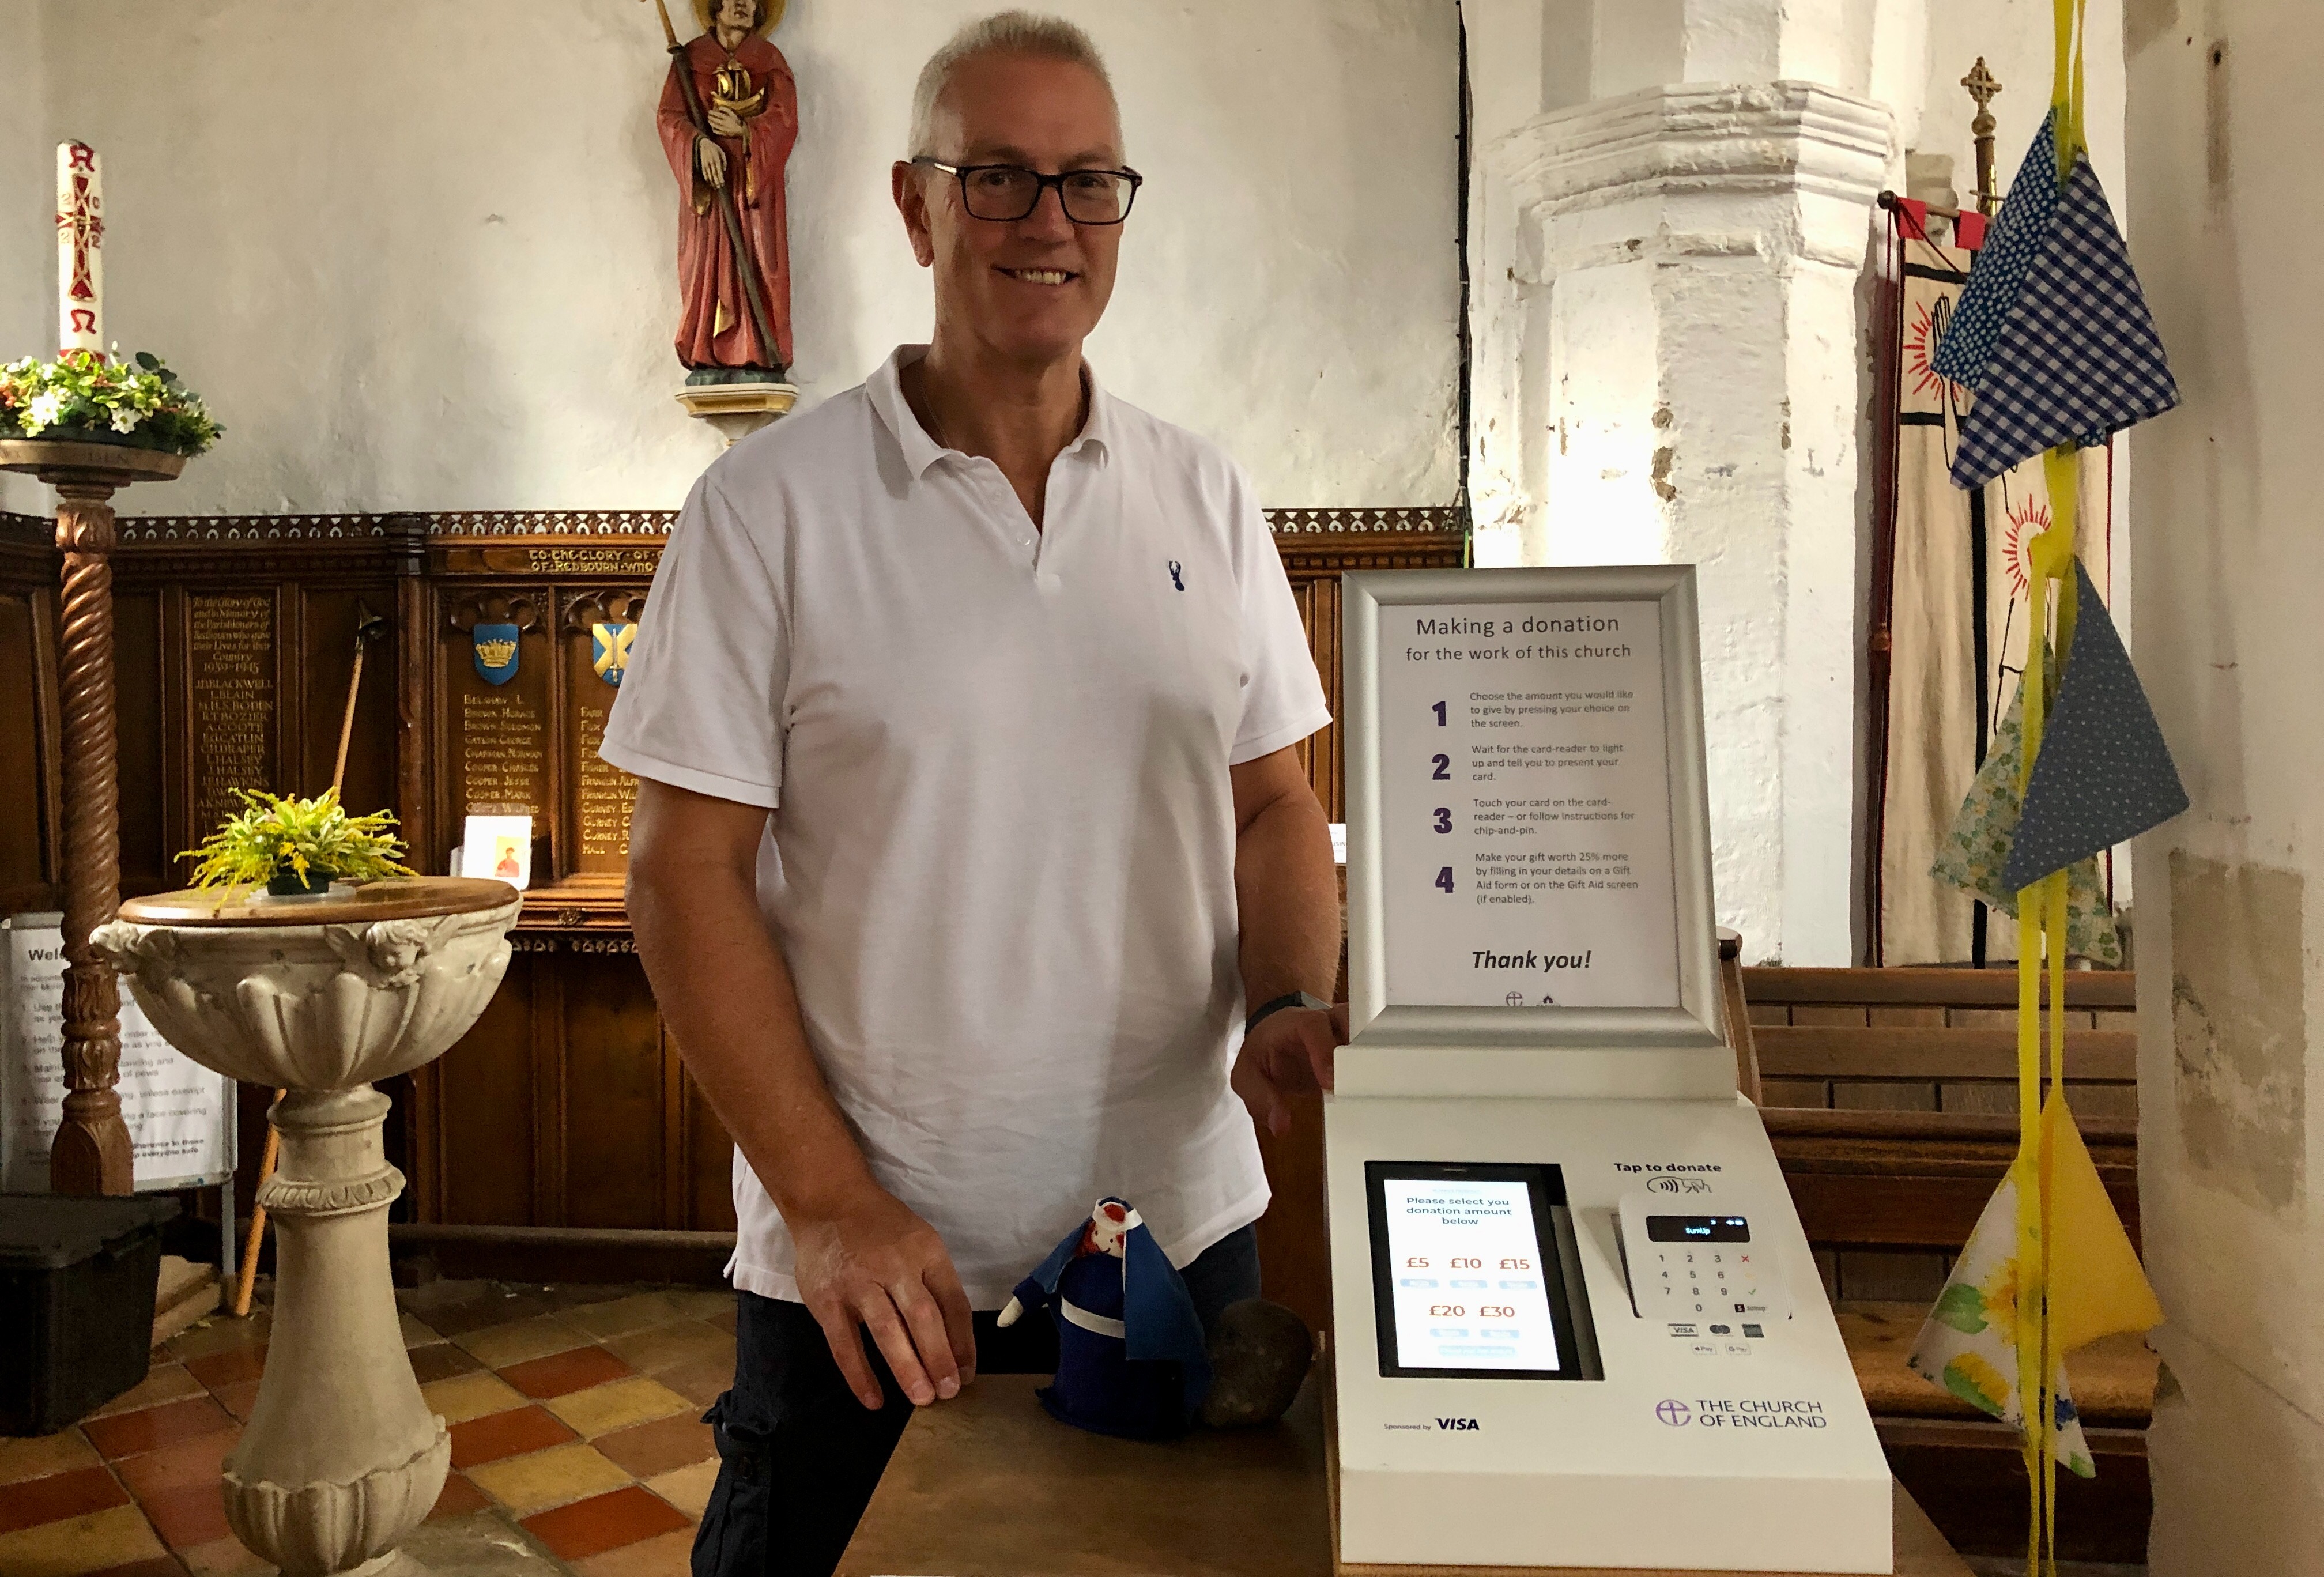 Michael, Treasurer at St Marys church in Redbourn is standing next to a donation station installed with Give A Little software